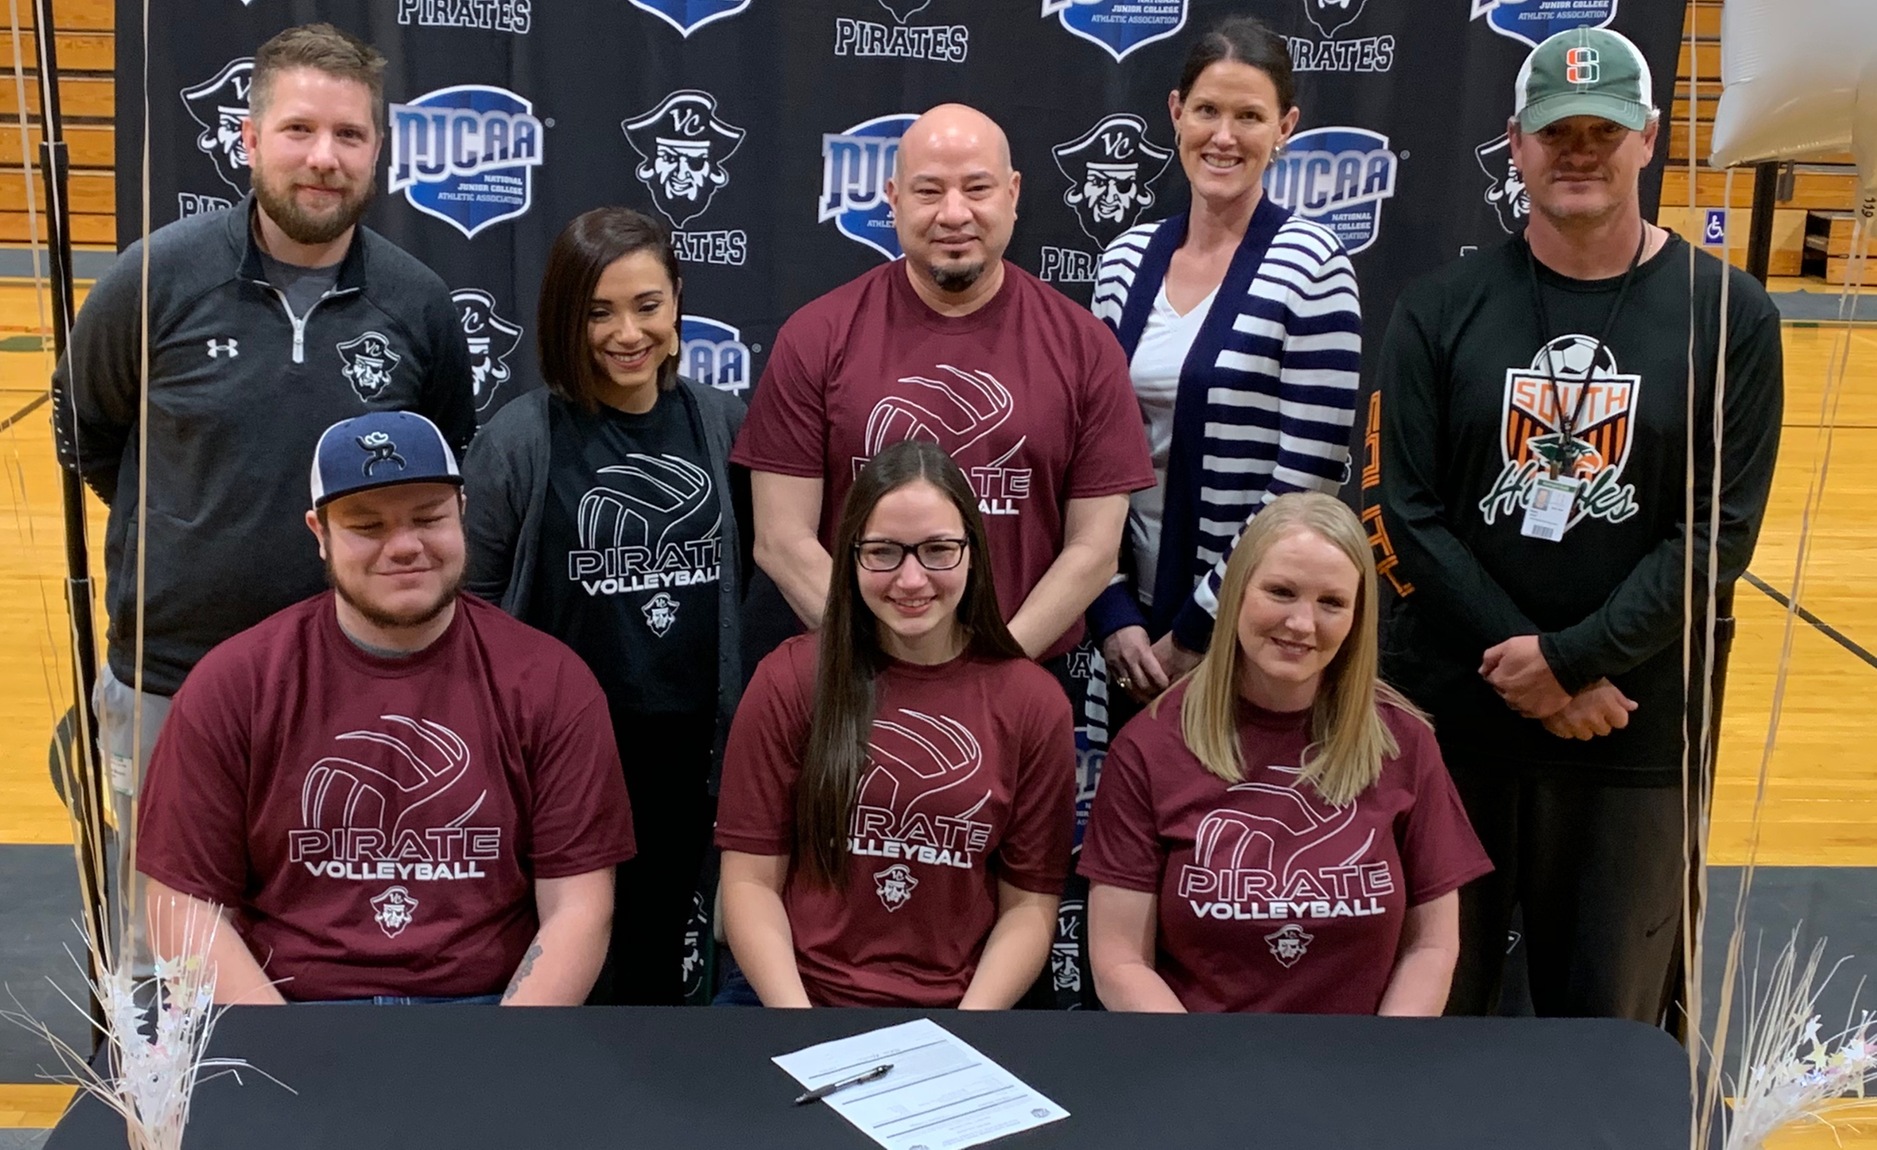 Harlingen South's Mikela Mireles signed a volleyball letter-of-intent with Victoria College on Tuesday. Seated next to Mireles are her brother, Miguel Mireles Jr., and mother, Sherri Mireles. Standing from left are VC Head Volleyball Coach Josh Moore, Harlingen South Head Volleyball Coach Anissa Lucio, Harlingen South Assistant Volleyball Coach Brian Molina, Harlingen South Assistant Principal Kathleen Hollon, and Harlingen South Athletic Coordinator Brian Ricci.